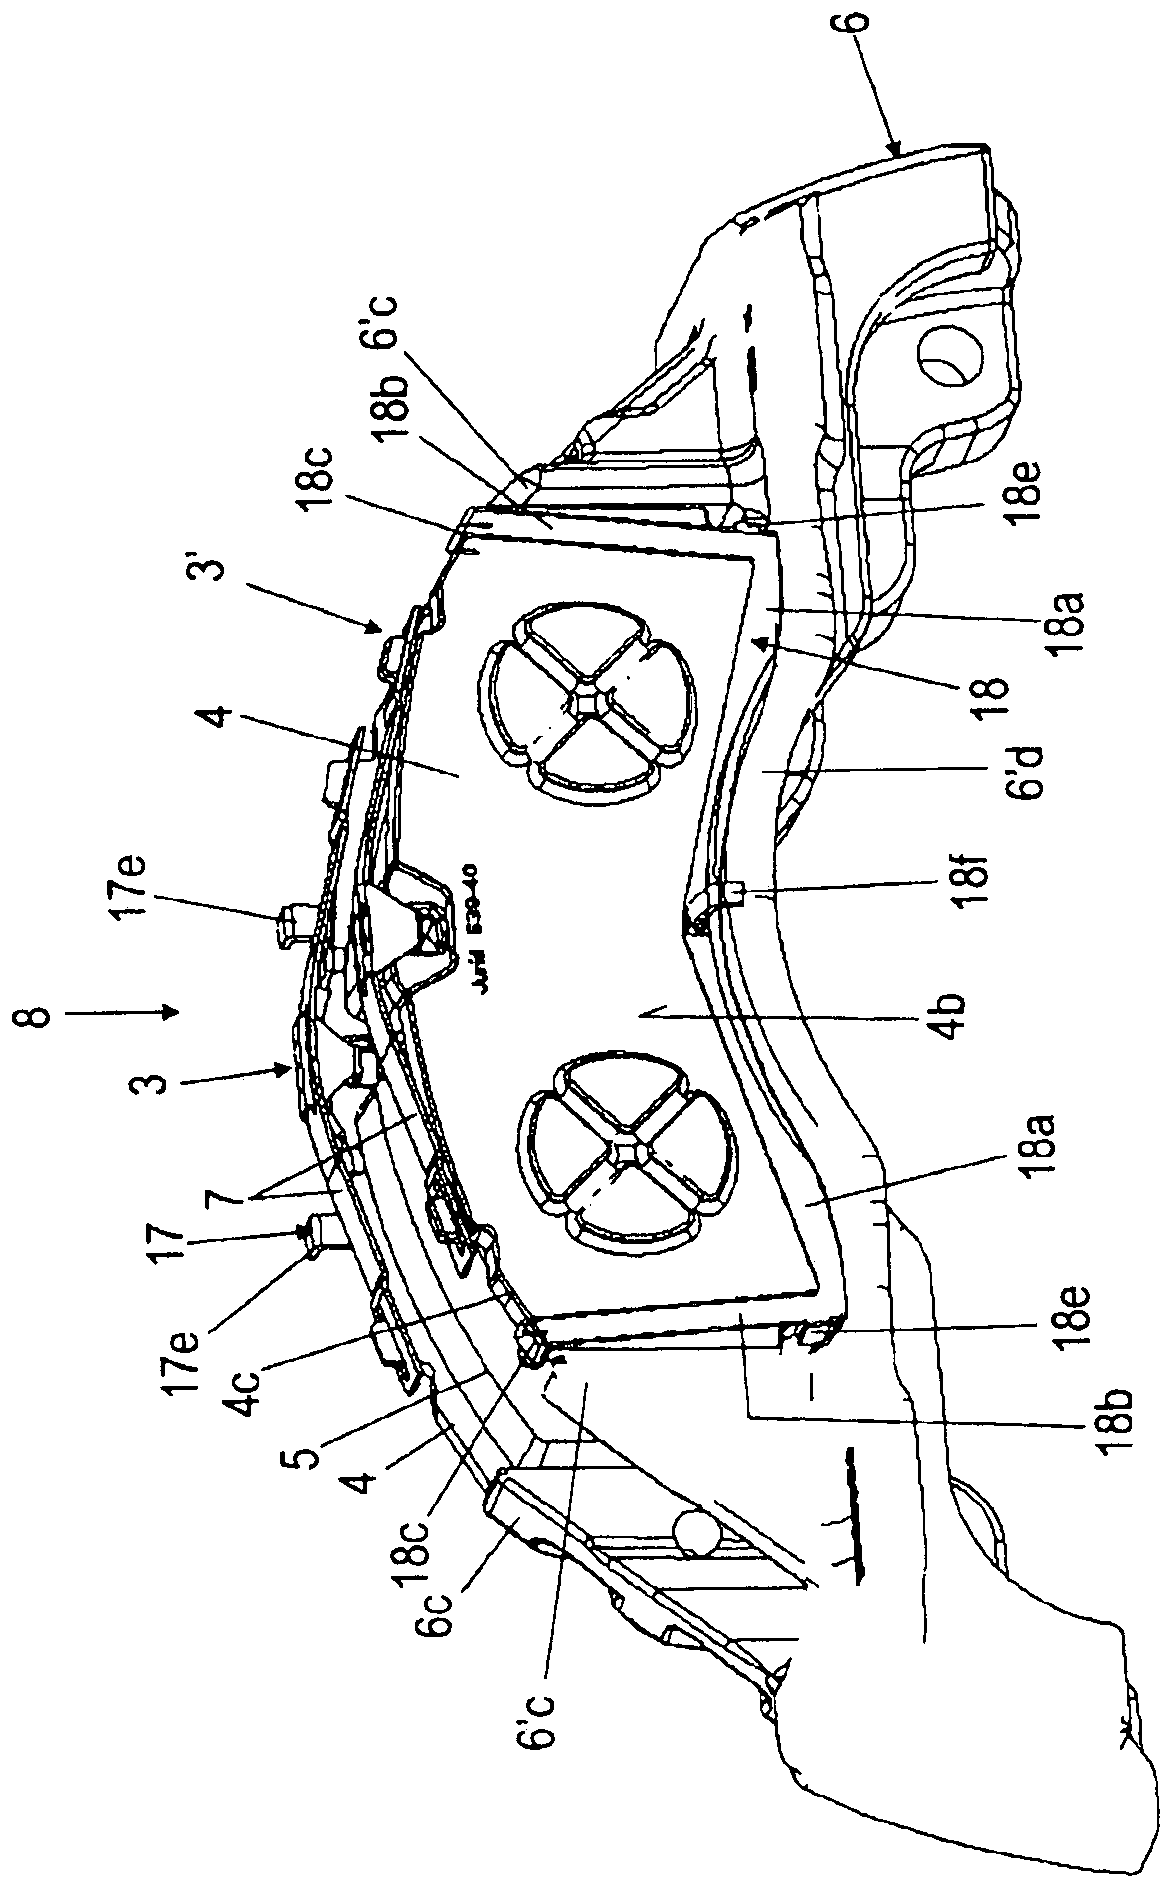 Disc brake for a utility vehicle, and brake pad set